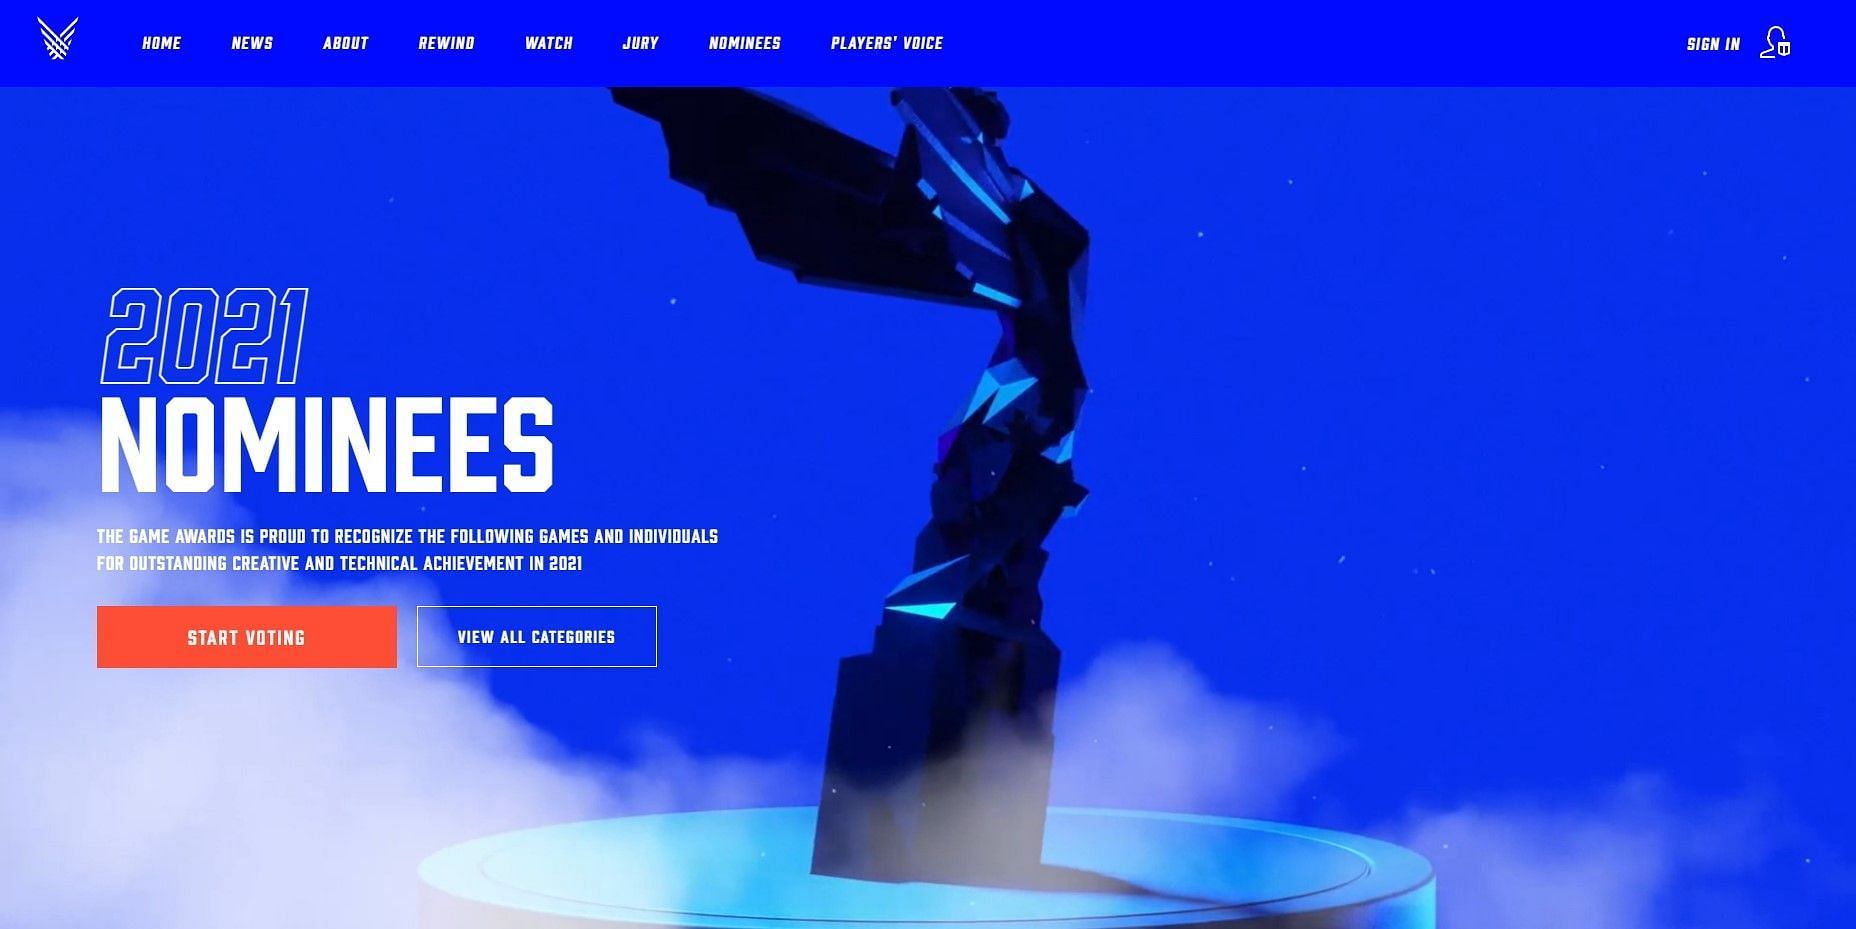 The home page for The Game Awards 2021 (Image via The Game Awards) )